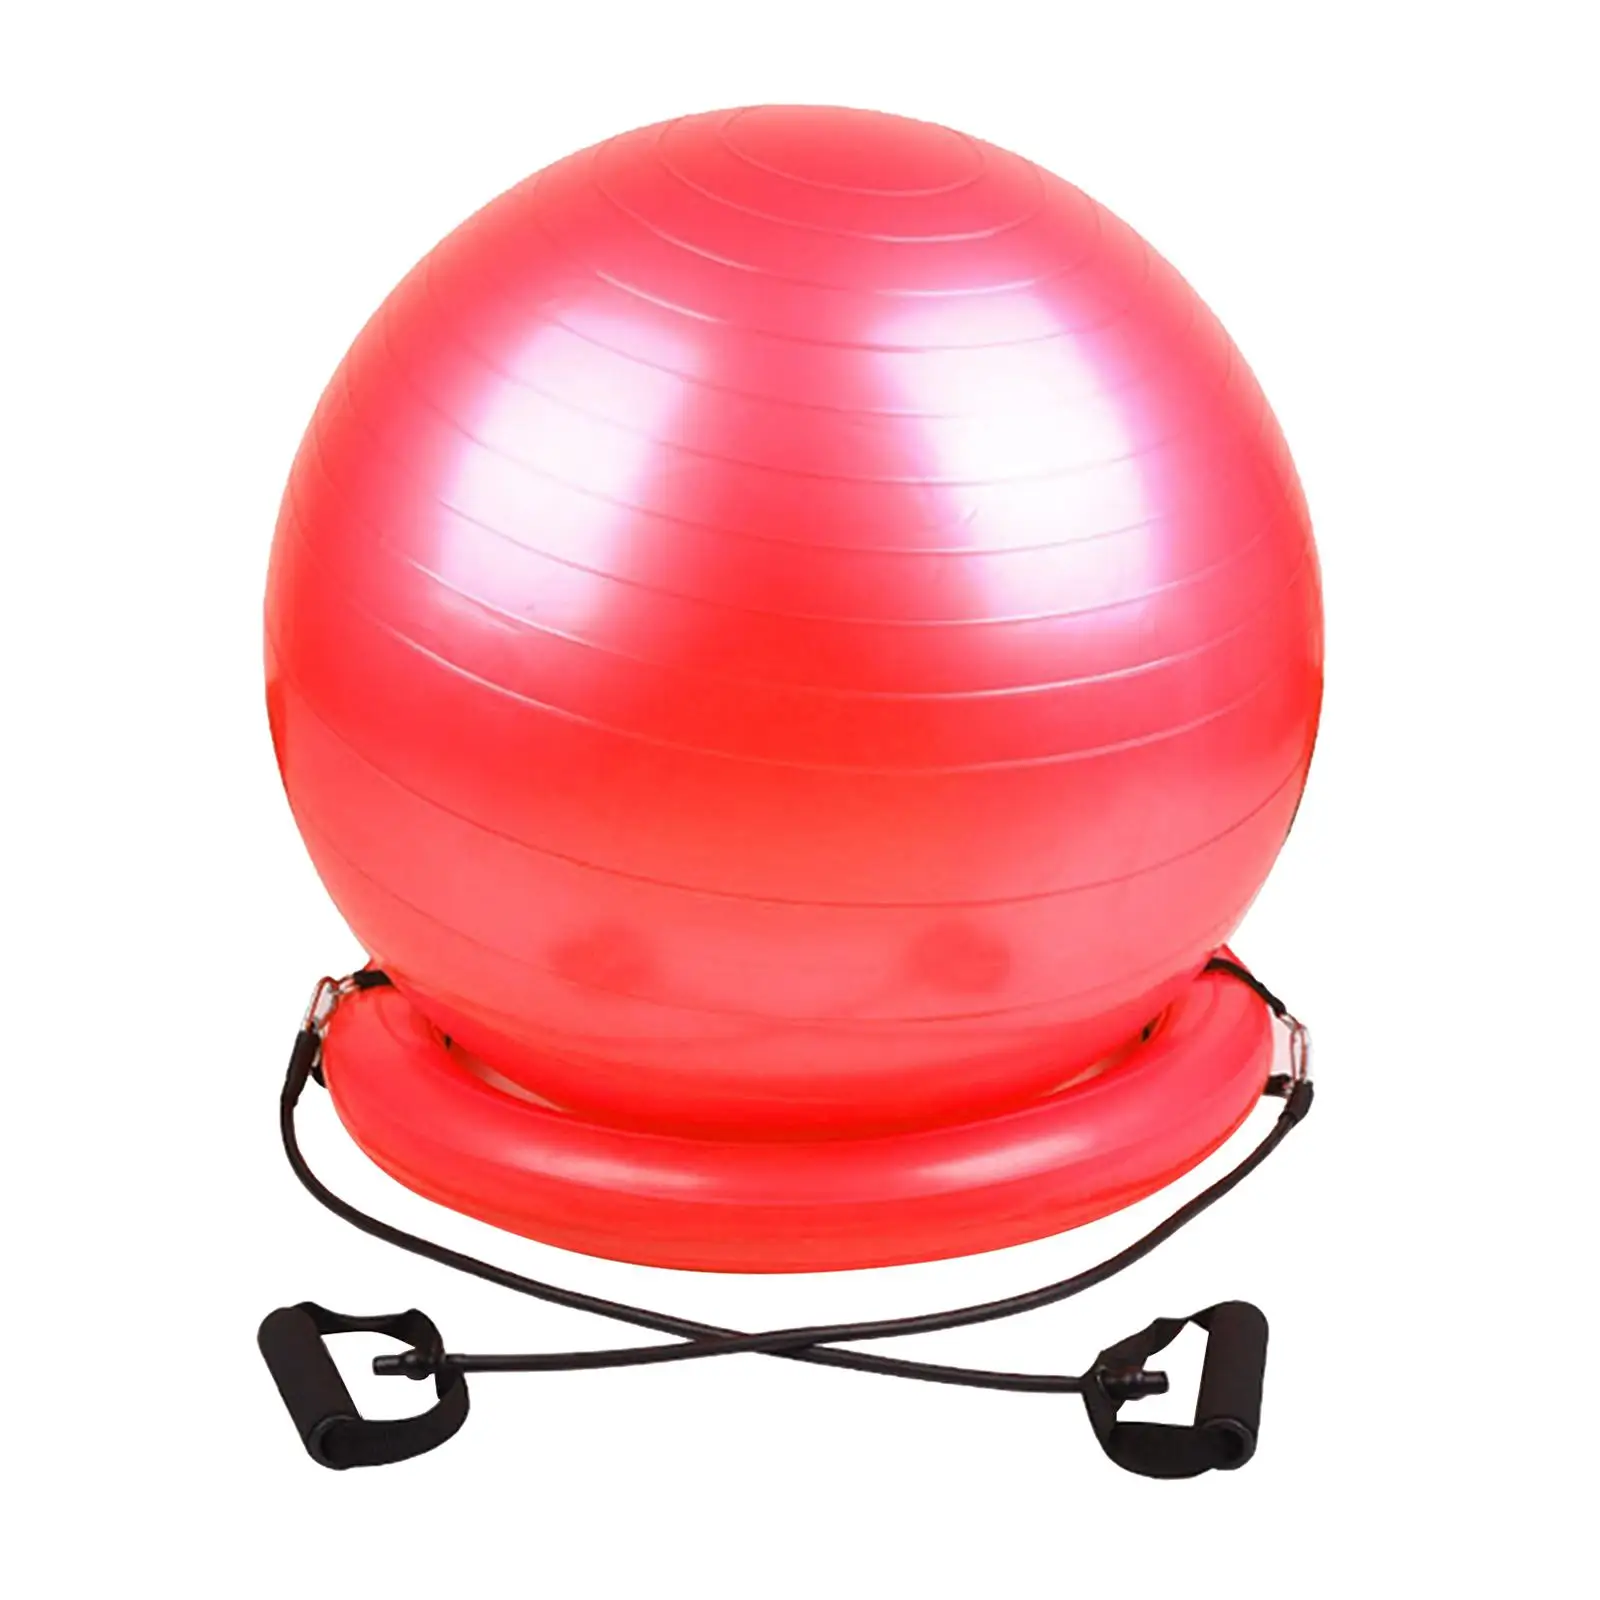 Exercise Ball -Stability  Ball with  Base, Resistance Bands And Pump, for Home, Office, Posture, ,